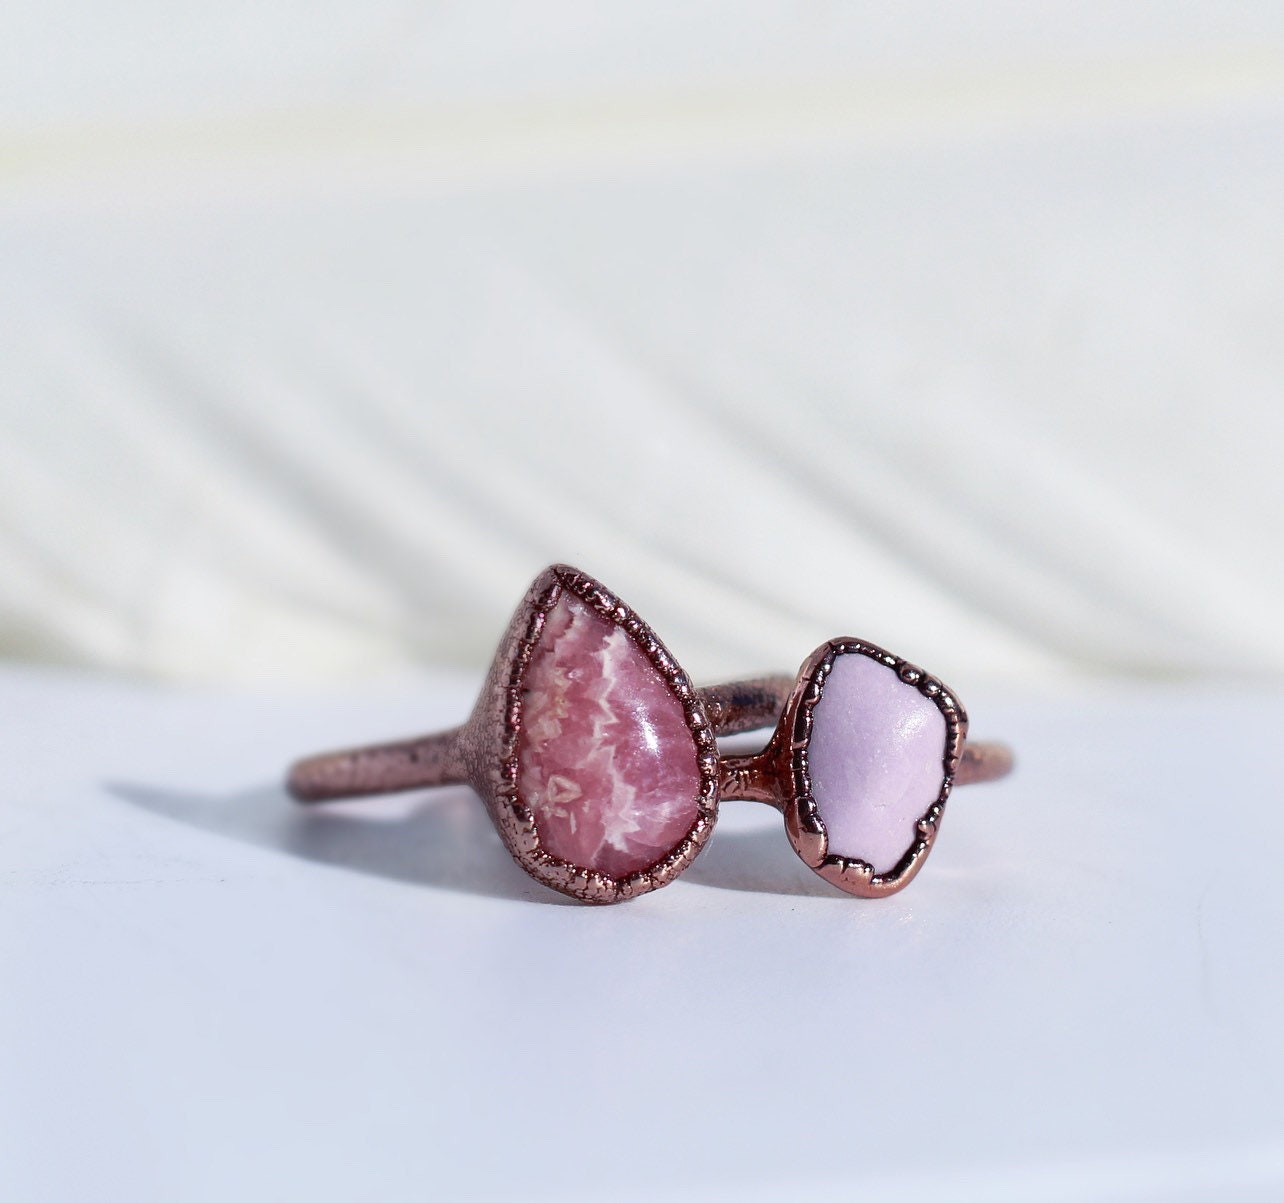 Rhodochrosite Teardrop Ring, Pink Gift for Her, Heart Chakra Stone Ring, Healing Stone Ring, Love Symbol Stone Ring, Gemstone Ring Copper